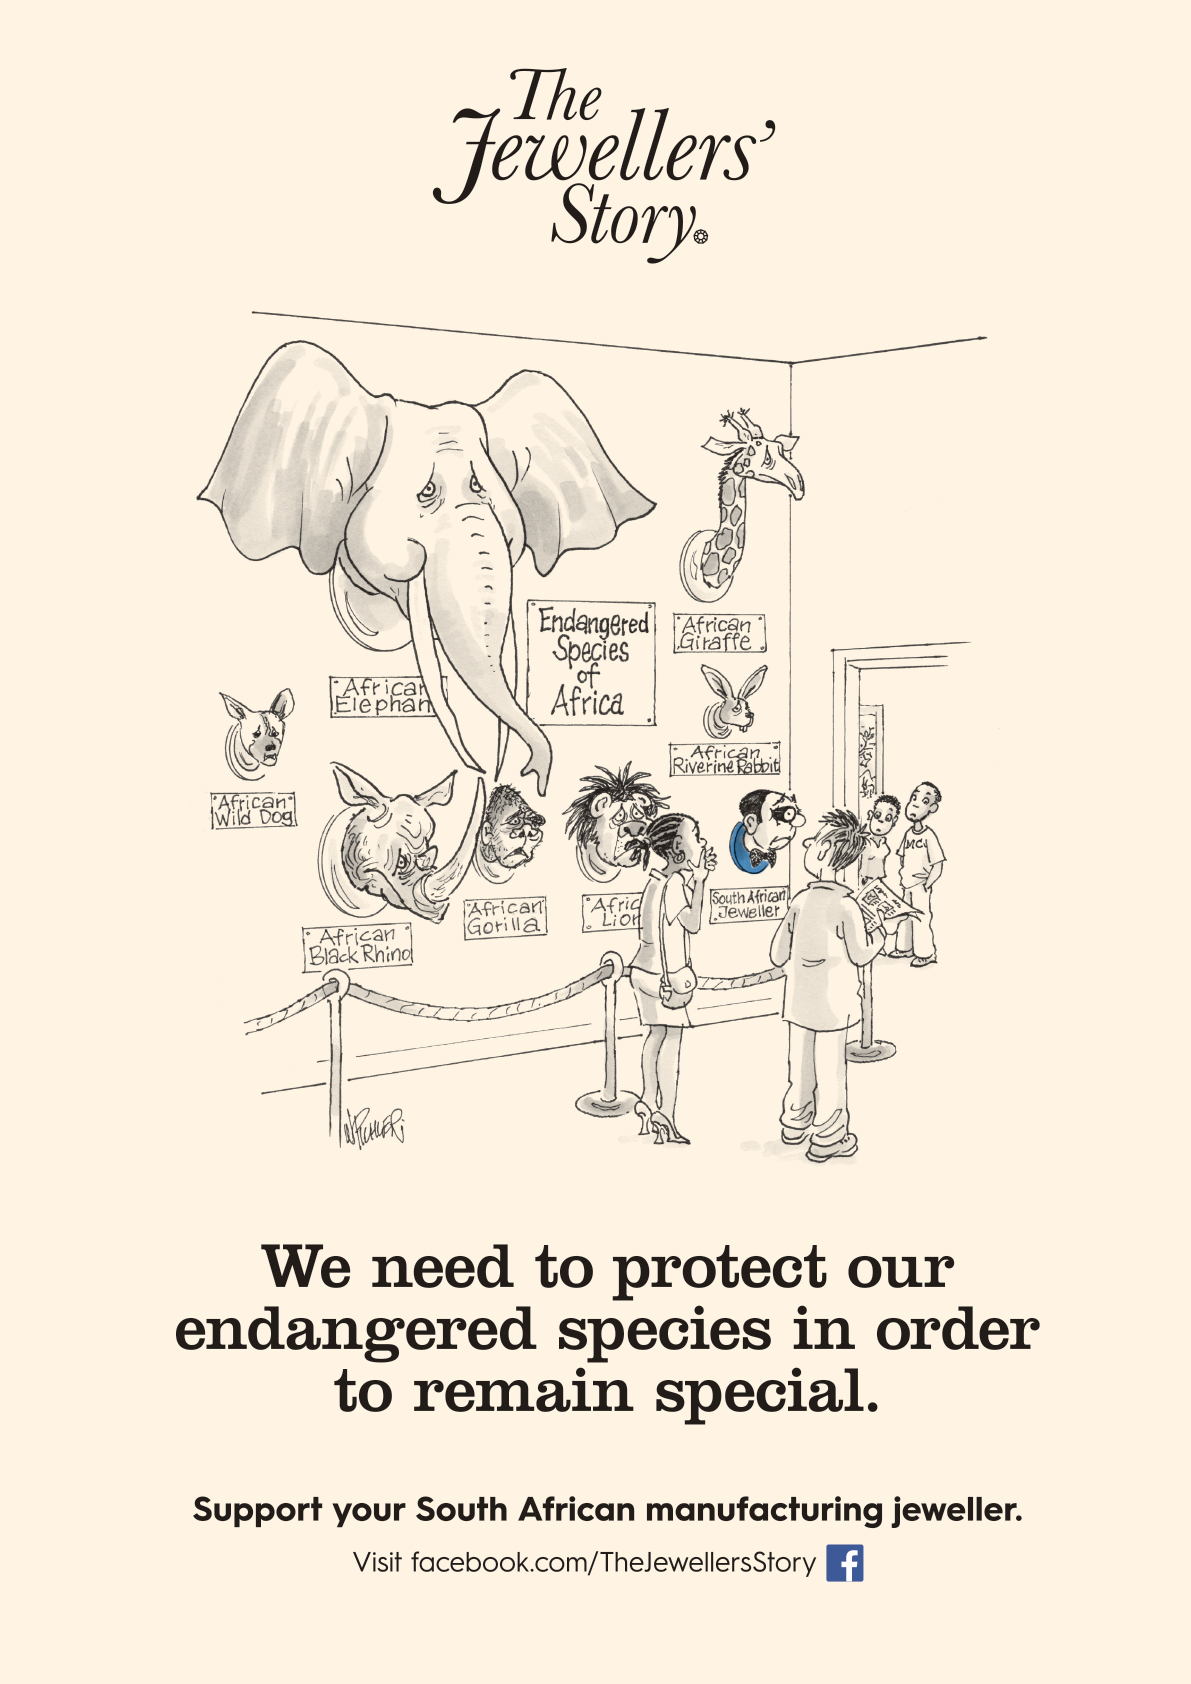 Protect our endangered species